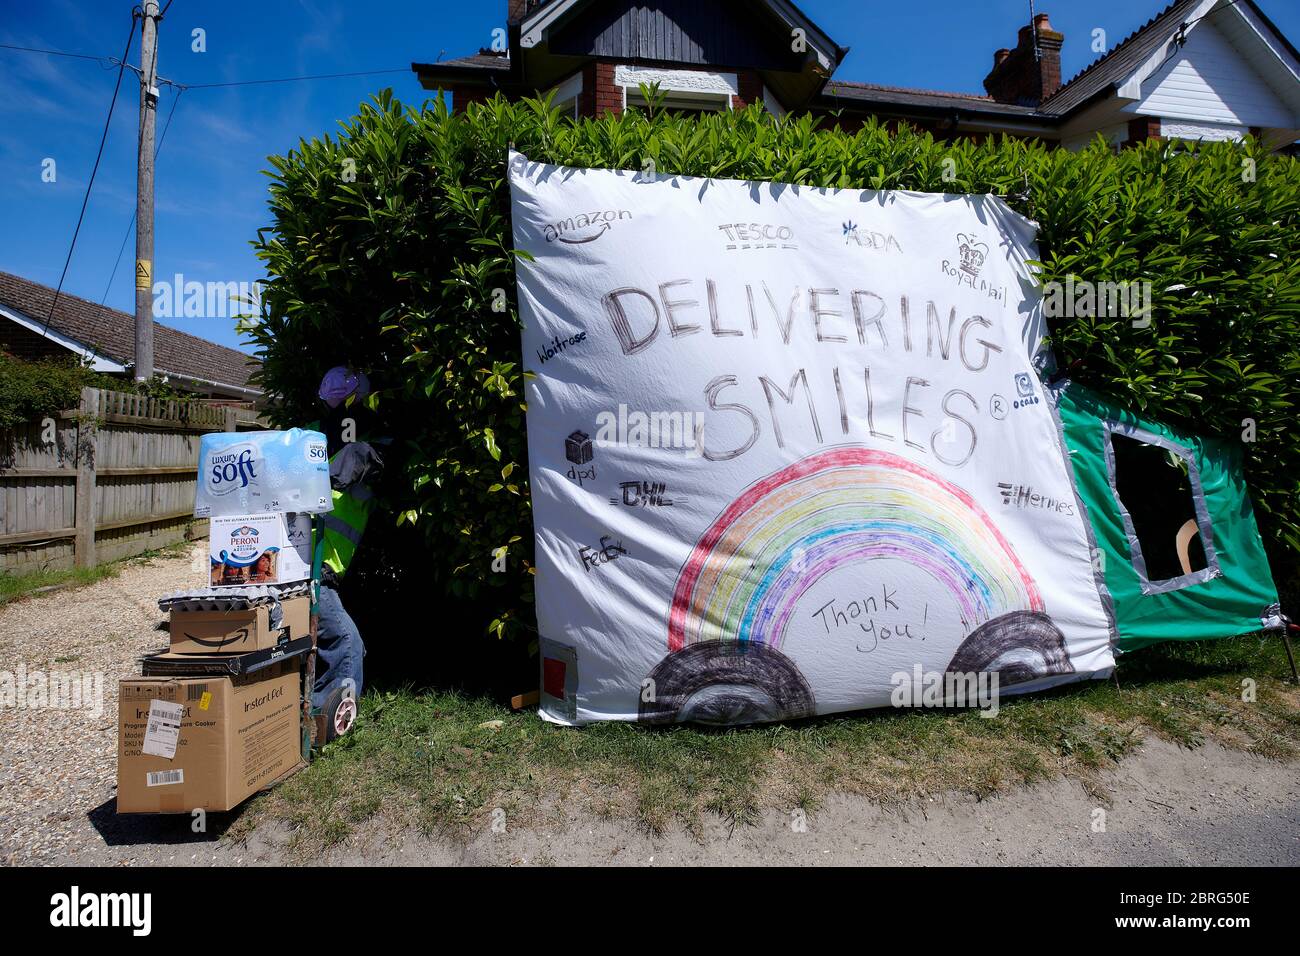 Sandleheath, UK. - May 20, 2020: A delivery worker themed scarecrow display outside a house. The Hampshire village of Sandleheath holds an annual charity scarecrow competition. Many entries this year adopt a coronavirus theme. Stock Photo